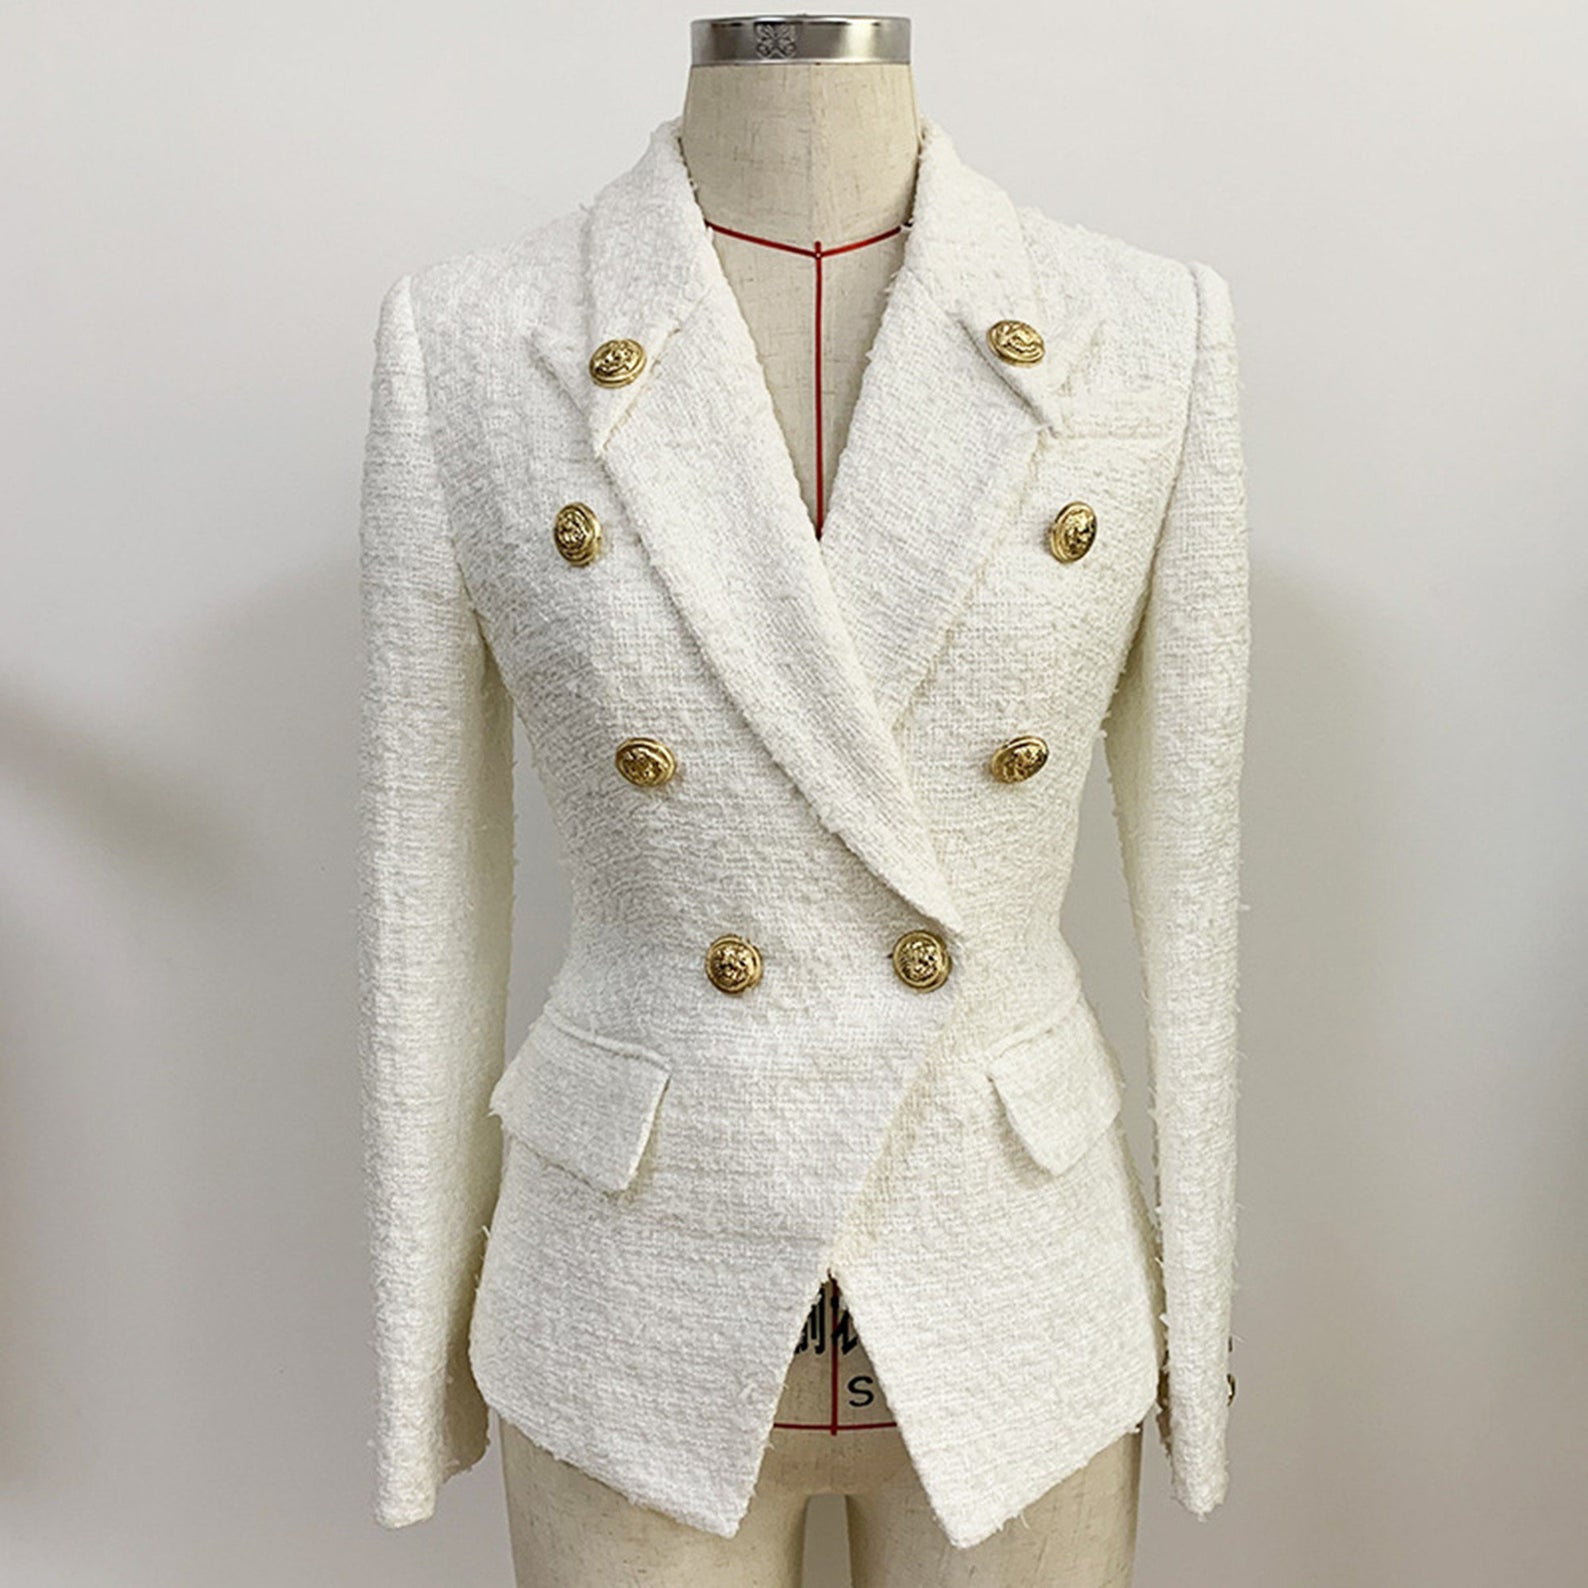 Women's Luxury Designer Inspired Fitted Tweed Blazer Golden Lion Buttons White UK CUSTOMER SERVICE! Women's Luxury Designer Inspired Fitted Tweed Blazer Golden Lion Buttons White, it has Golden button with two pockets , can wear it for official use, College Inauguration ,it gives more comfort and confident to wear. Size: UK 4-14/ EU 32-42/ US 0-10